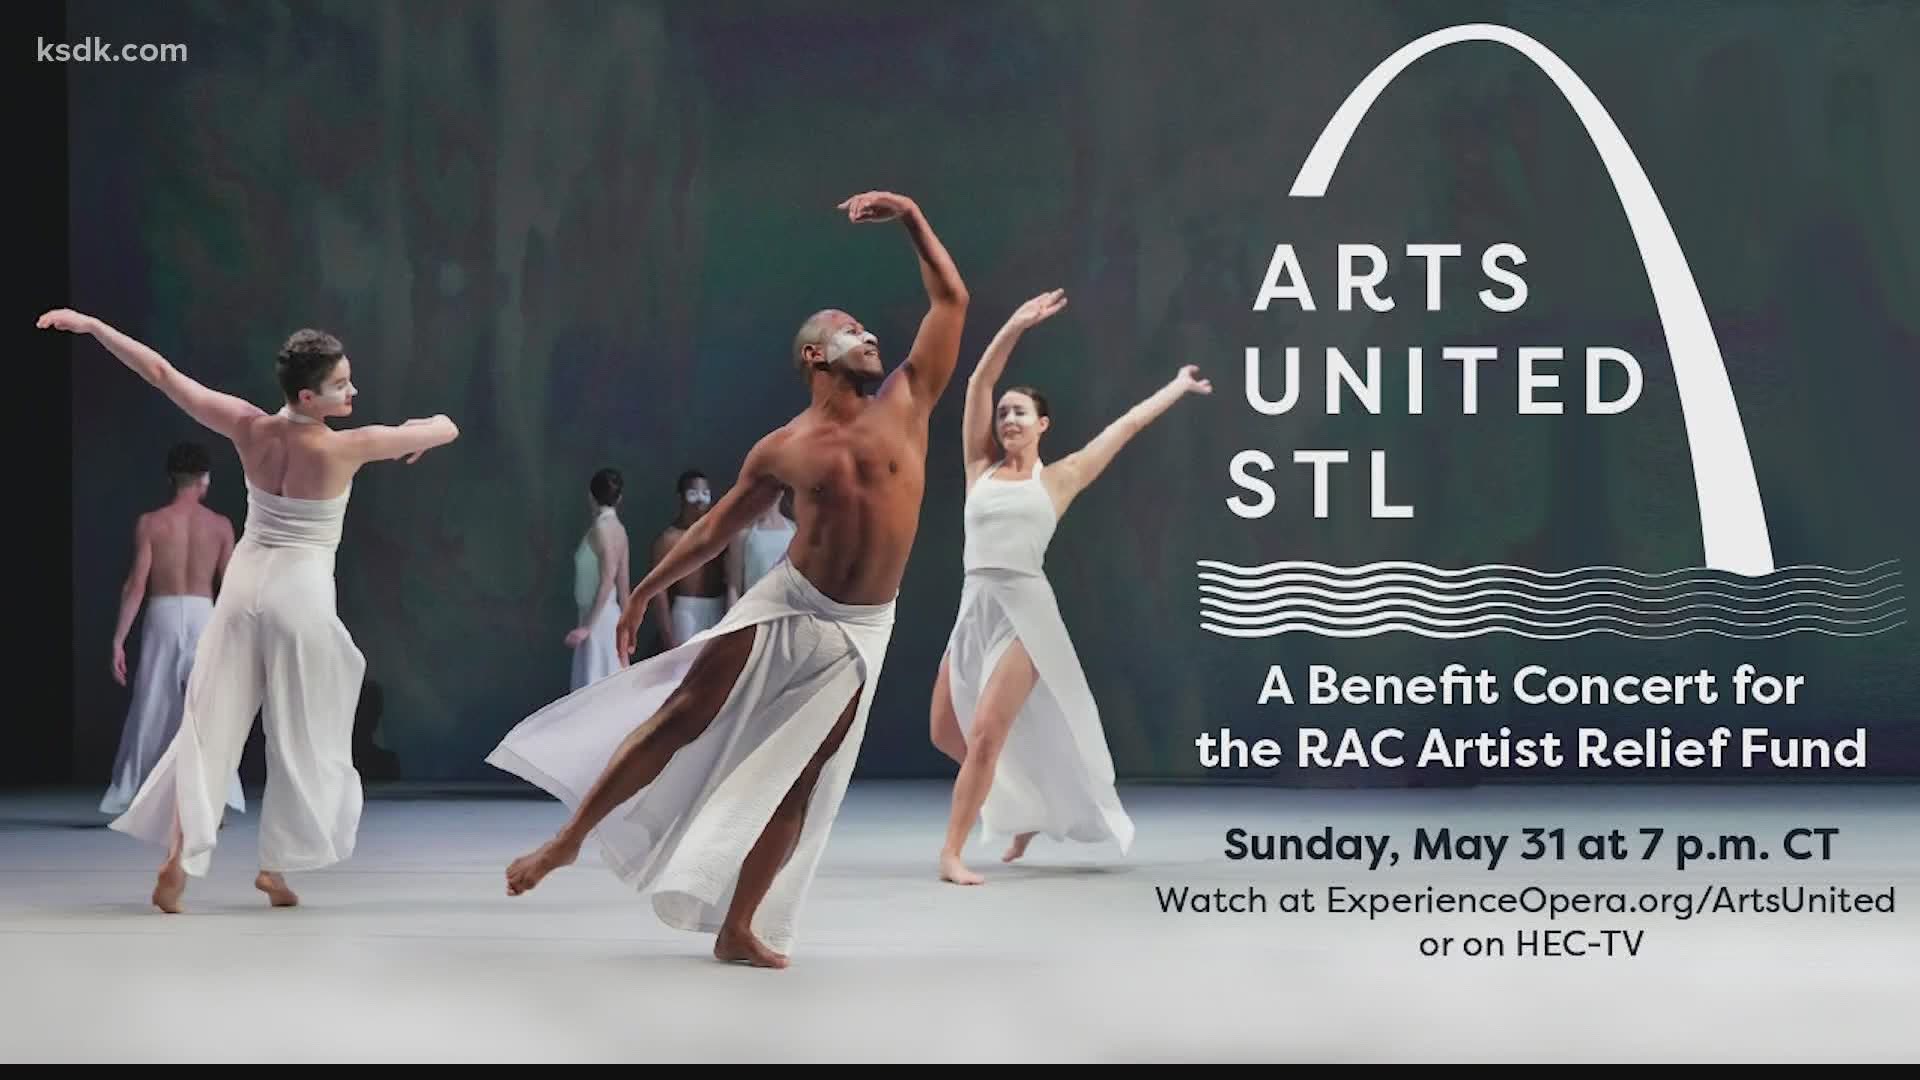 Arts United STL is Sunday, May 31, 2020 at 7 p.m. and can be watched online.